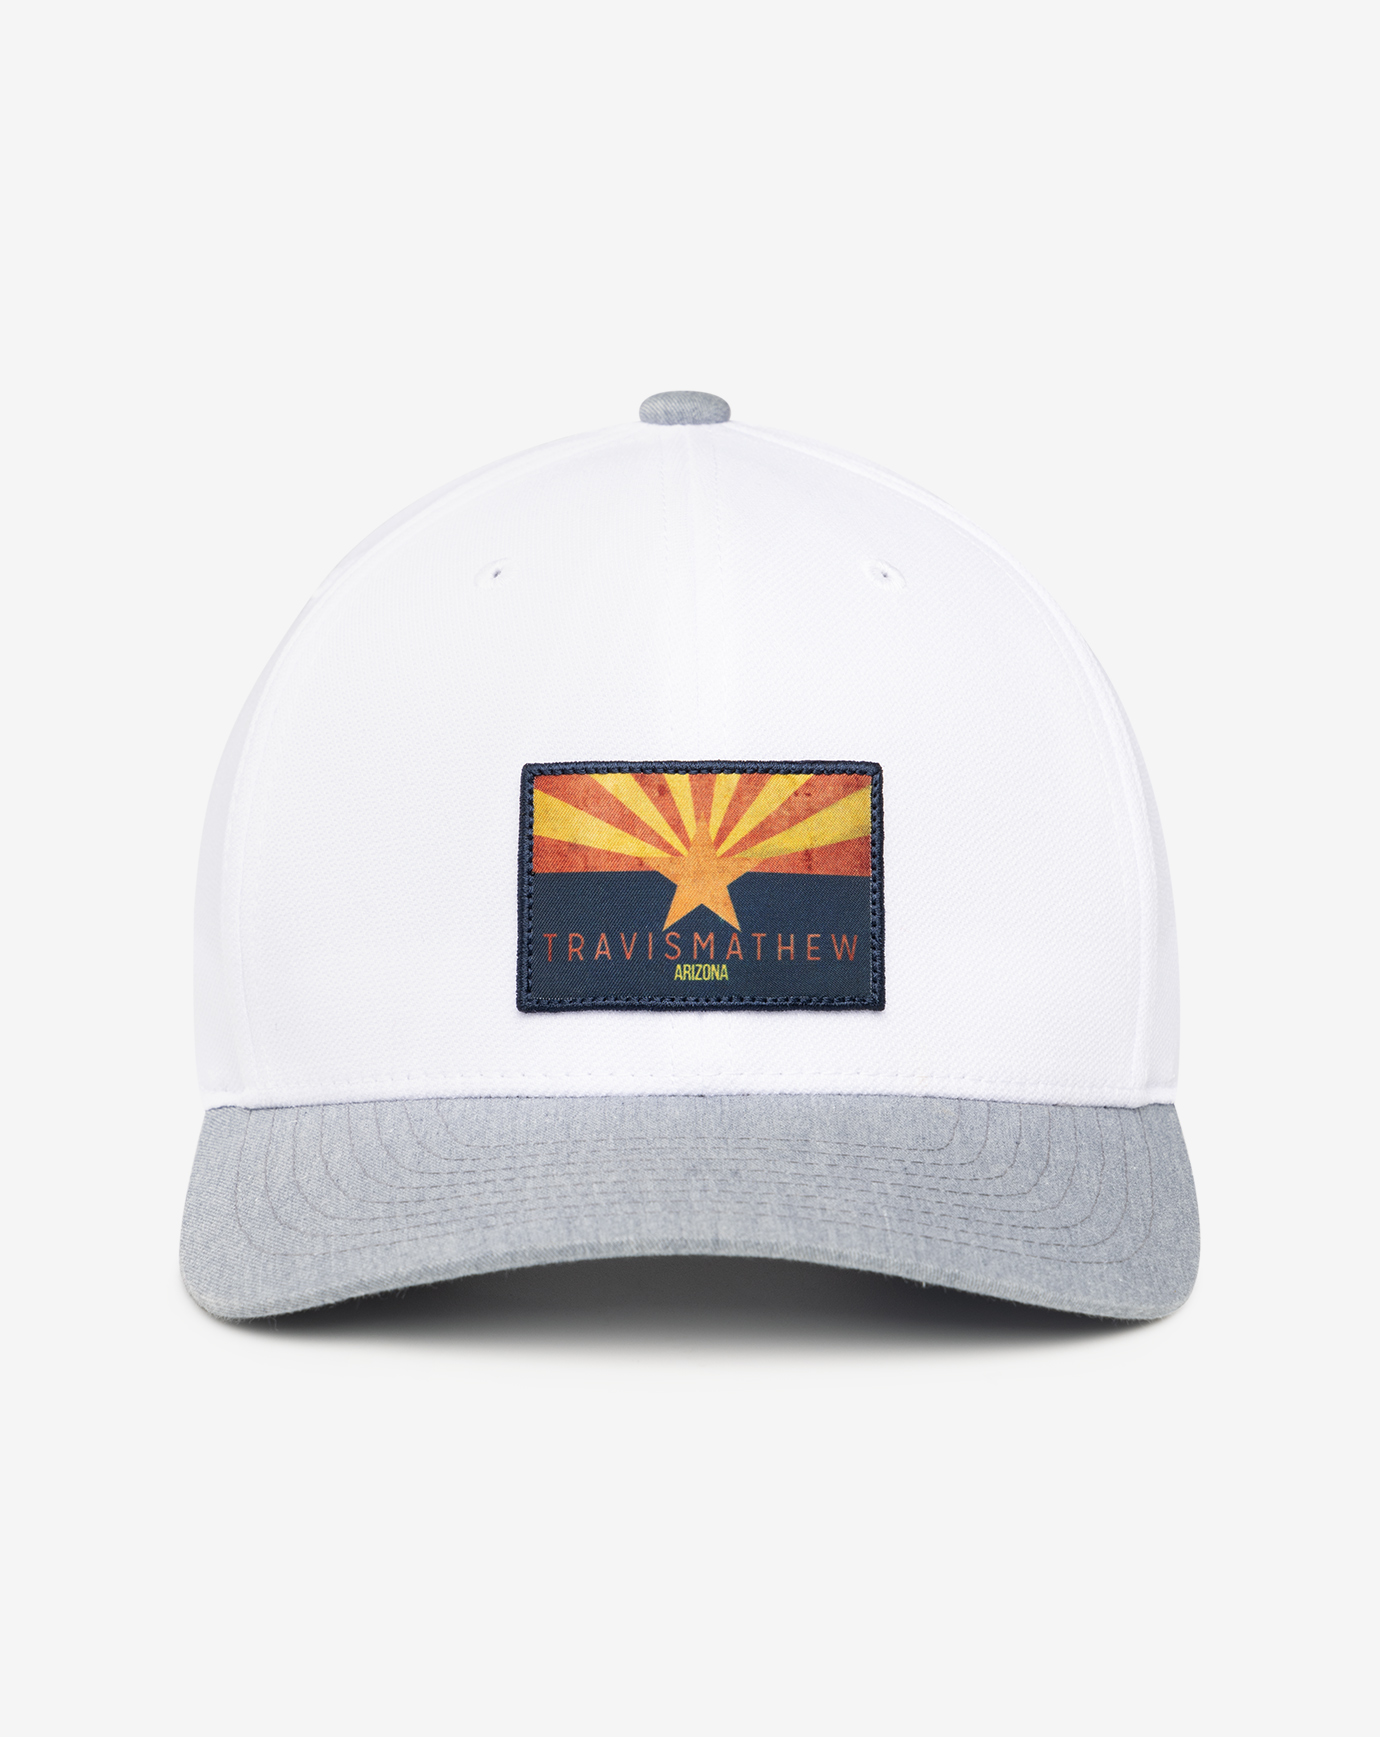 VALLEY OF THE SUN 2.0 SNAPBACK HAT 1